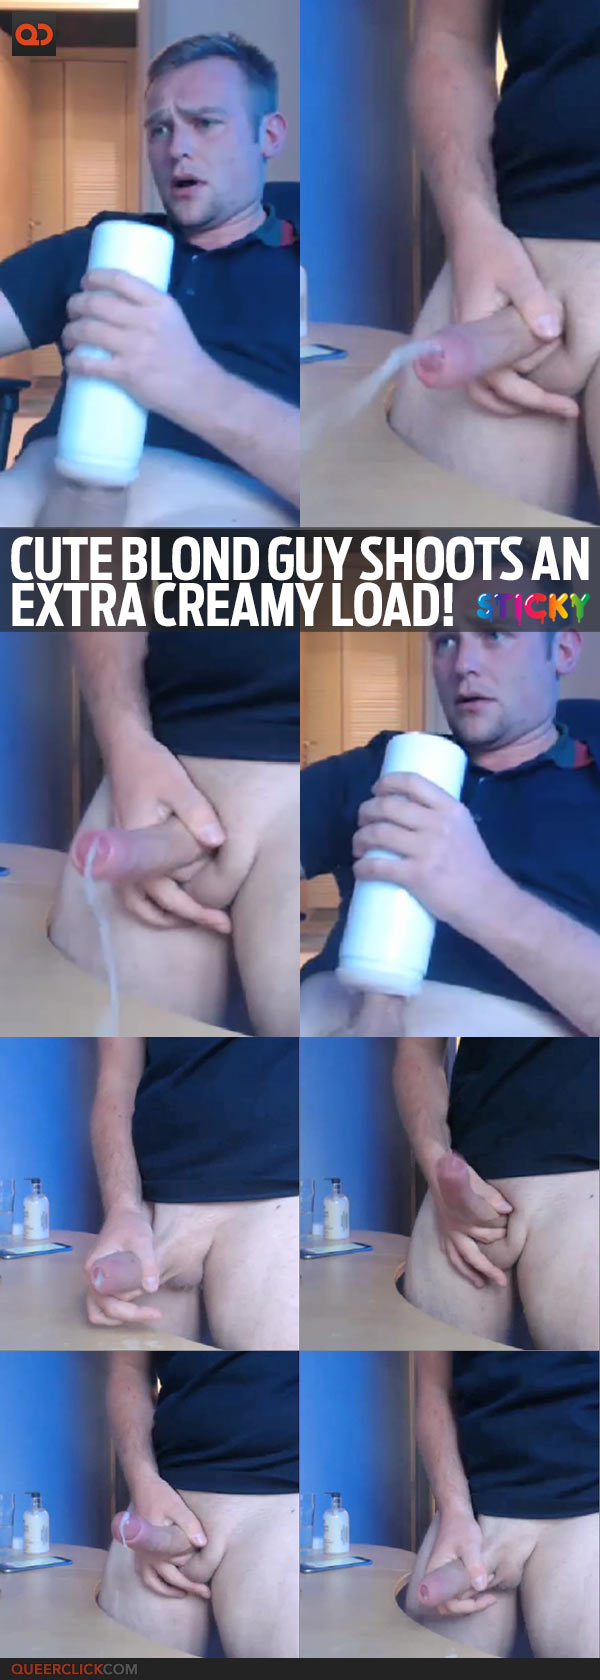 Cute Blond Guy Shoots An Extra Creamy Load!